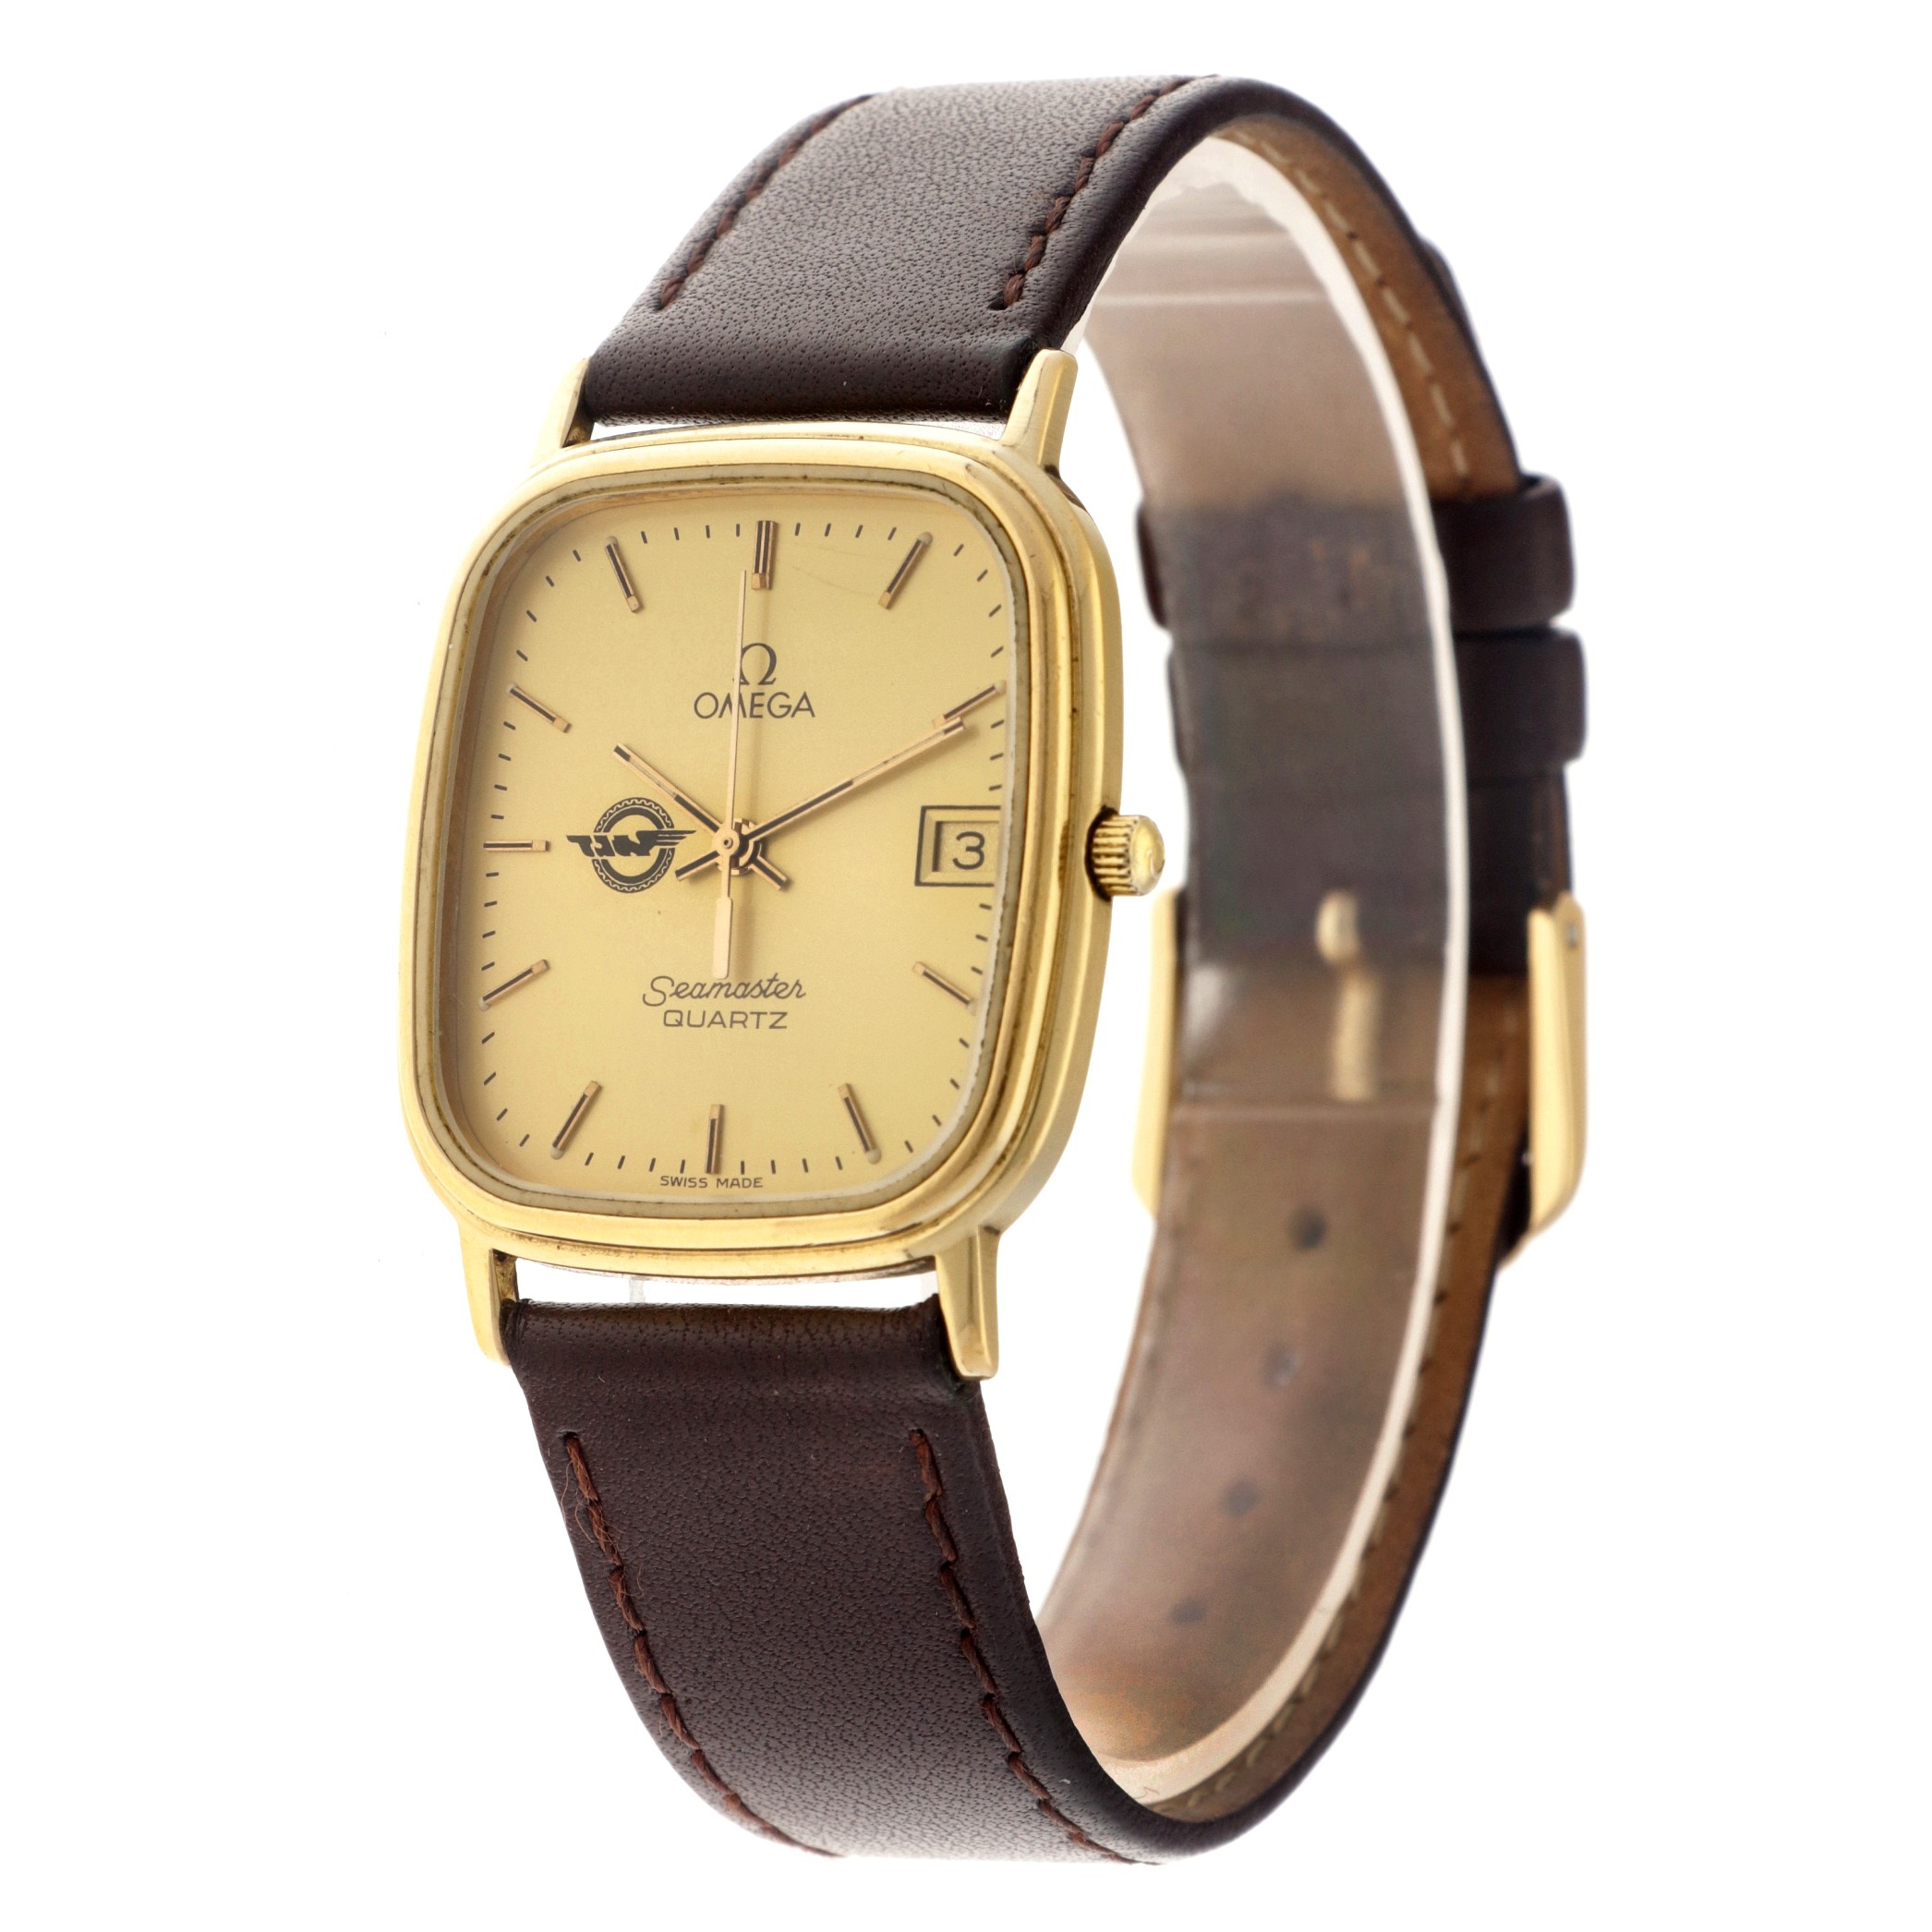 No Reserve - Omega Seamaster 1960267 - Men's watch - approx. 1984 - Image 2 of 5